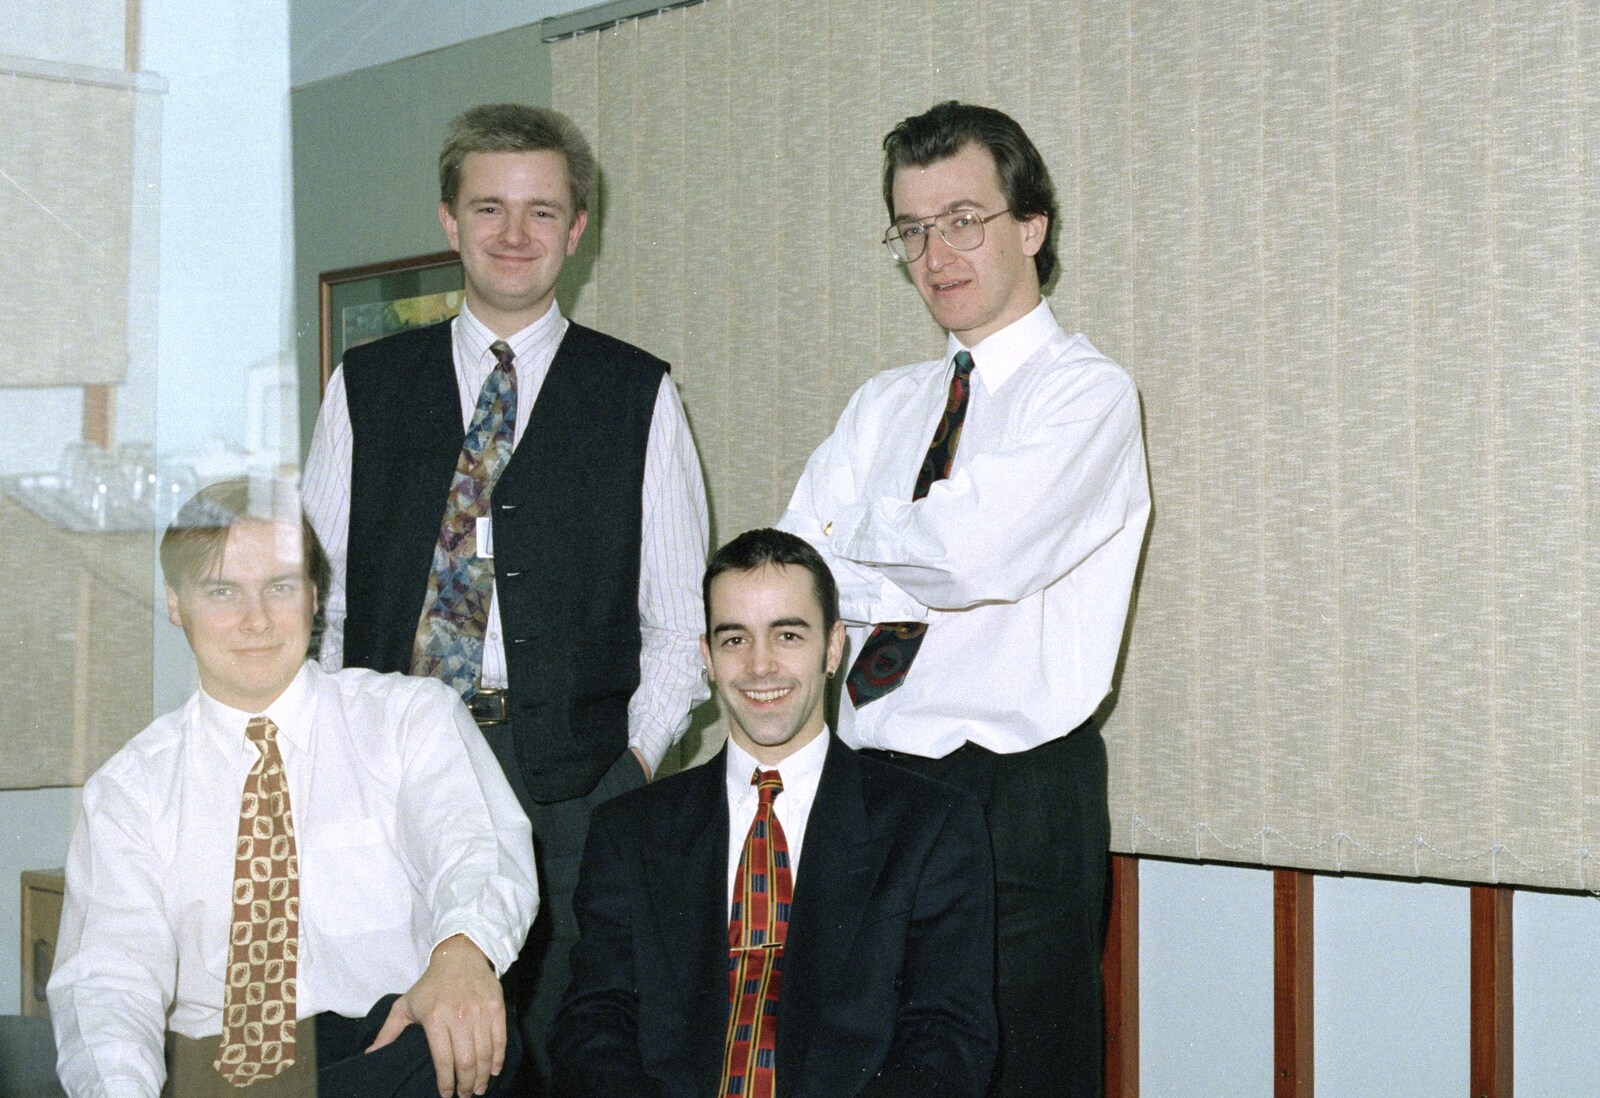 Campbell, Nosher, Trevor Smith and Phil from The CISU Internet Team, Bedroom Building and Ferries, Suffolk - 16th February 1996